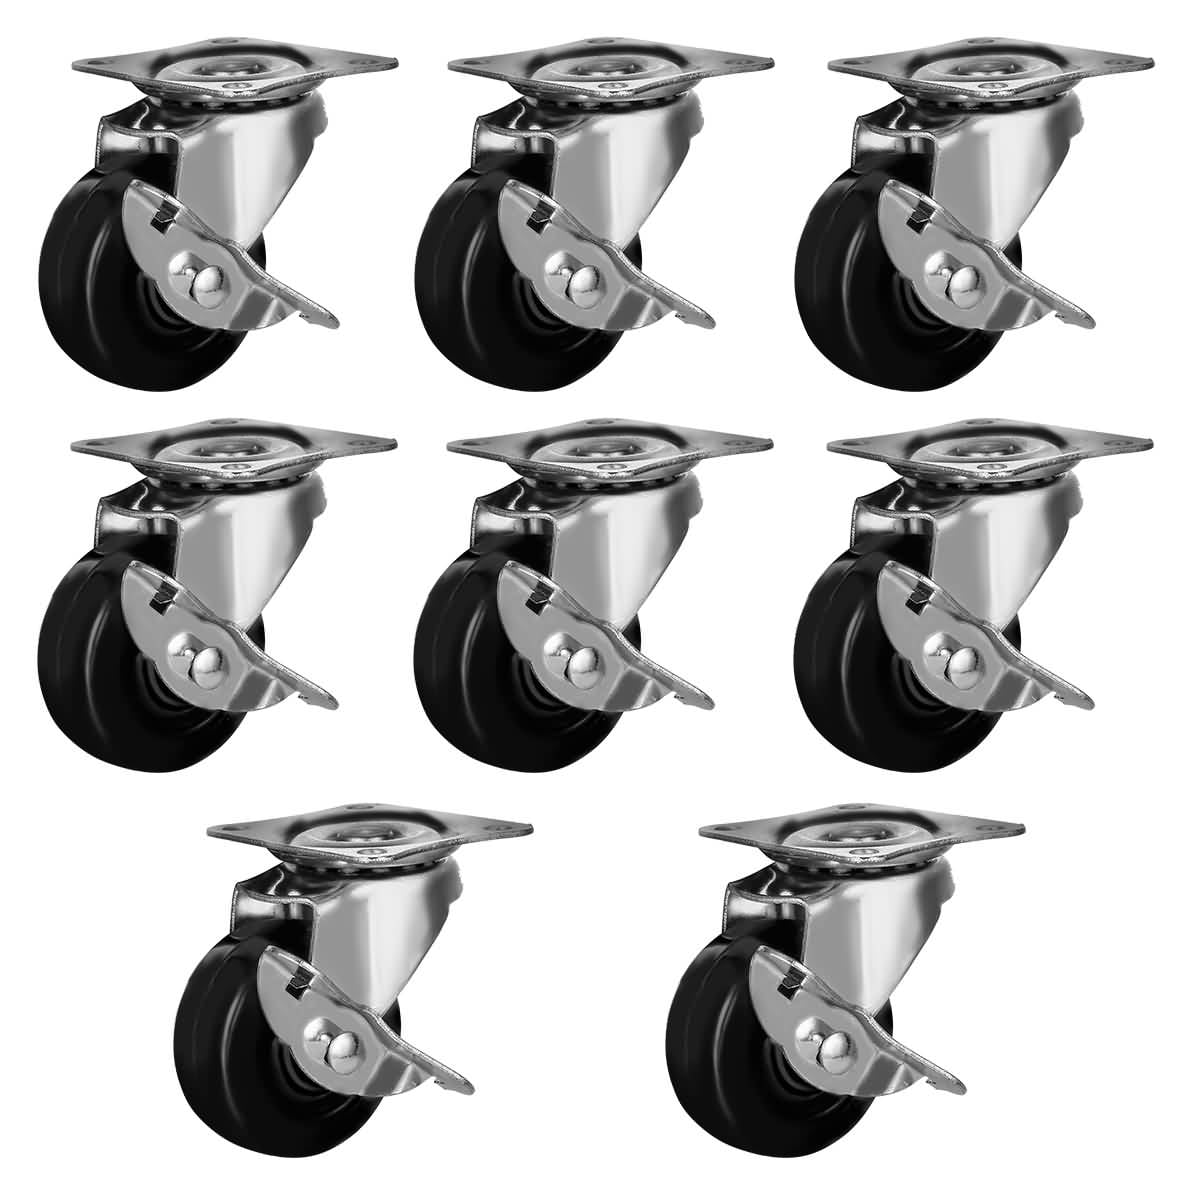 8 PK 2" Swivel Caster Wheels Hard Rubber Base with Top Plate & Bearing 